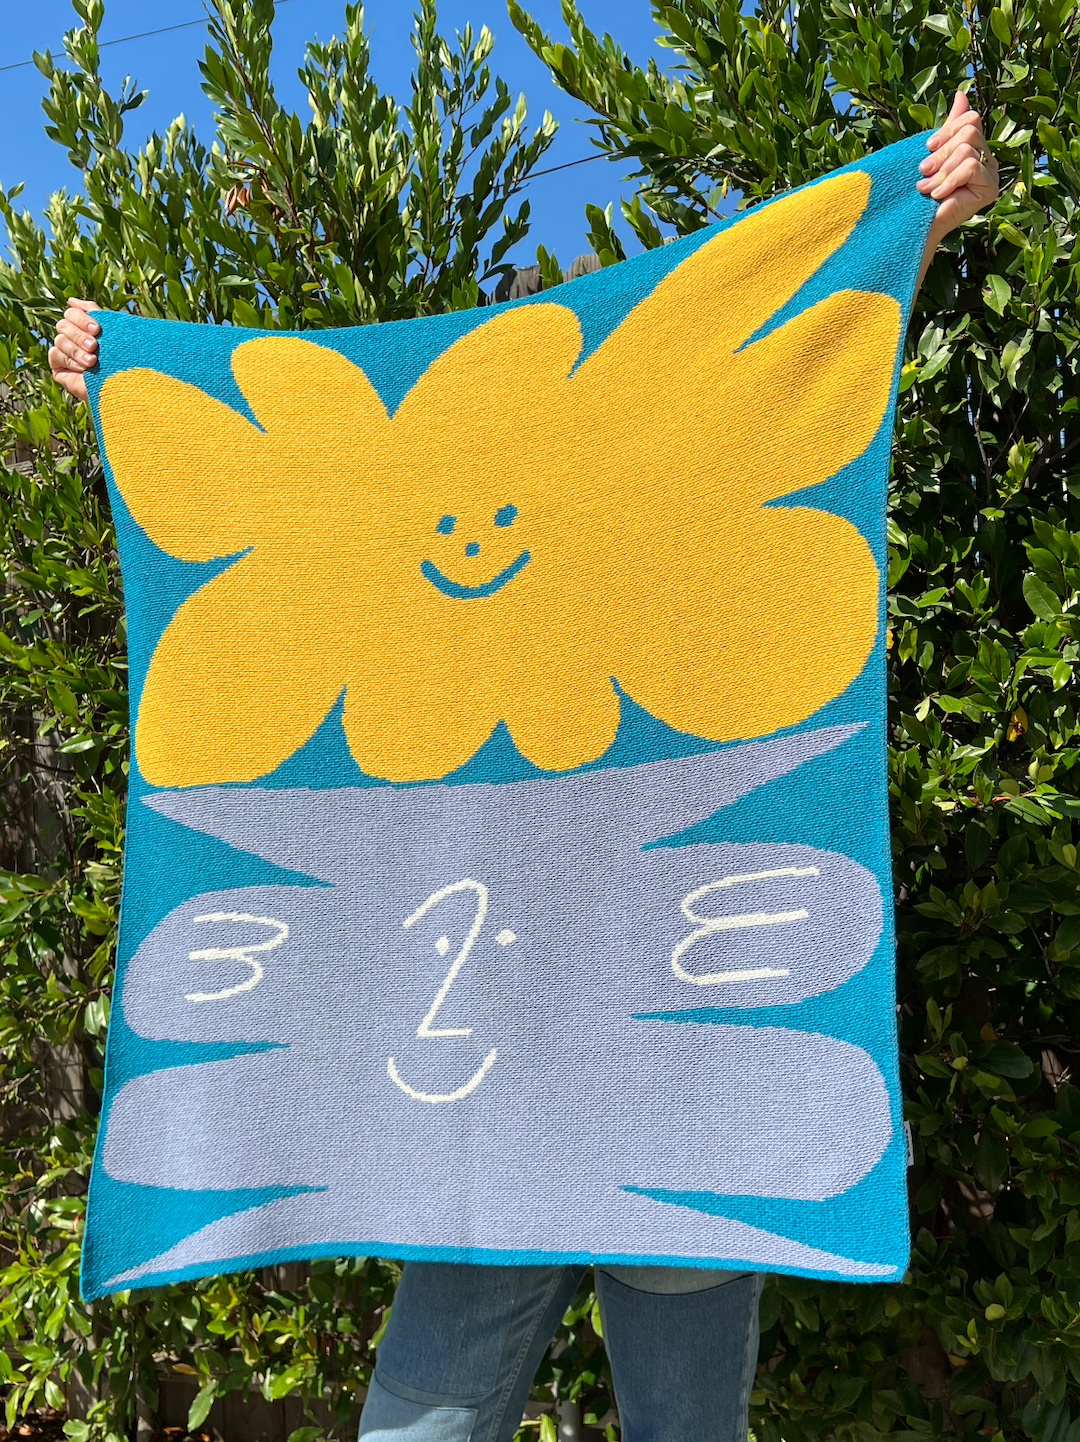 A mini blanket being held up for size, showing yellow and gray smiley patterns on a sky blue background